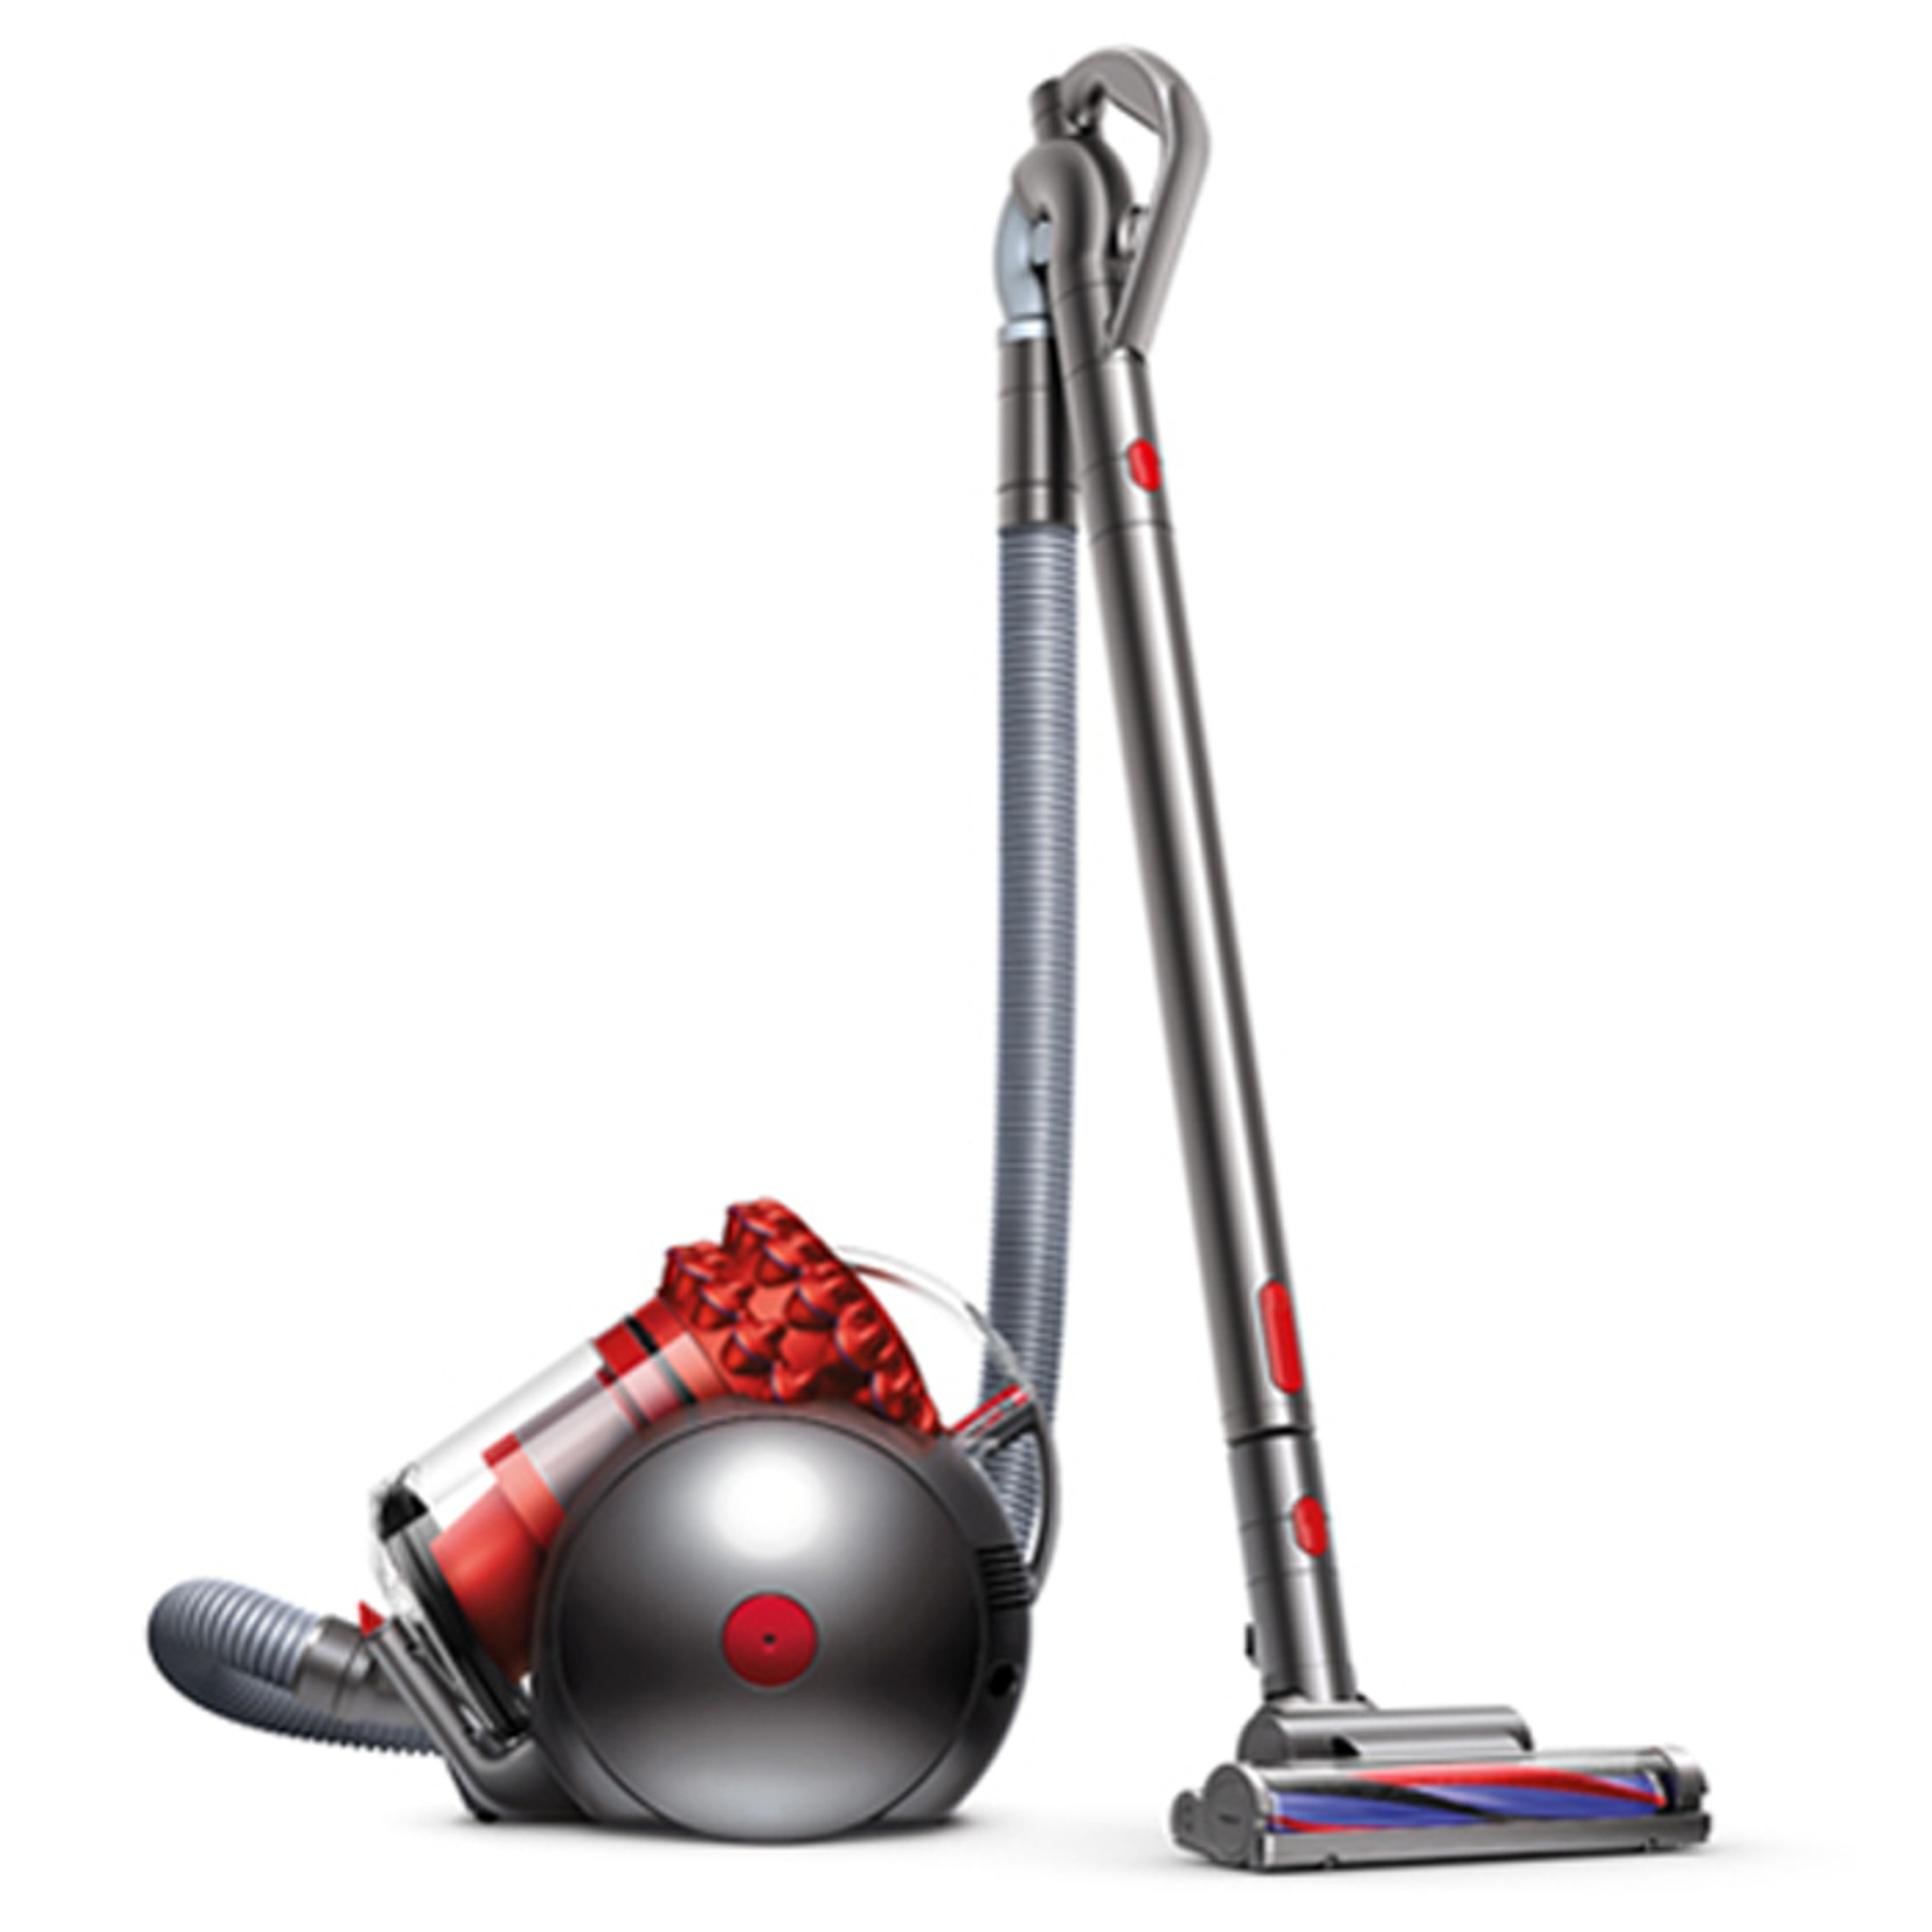  Dyson Home Cleaning Kit - Household Vacuum Parts And